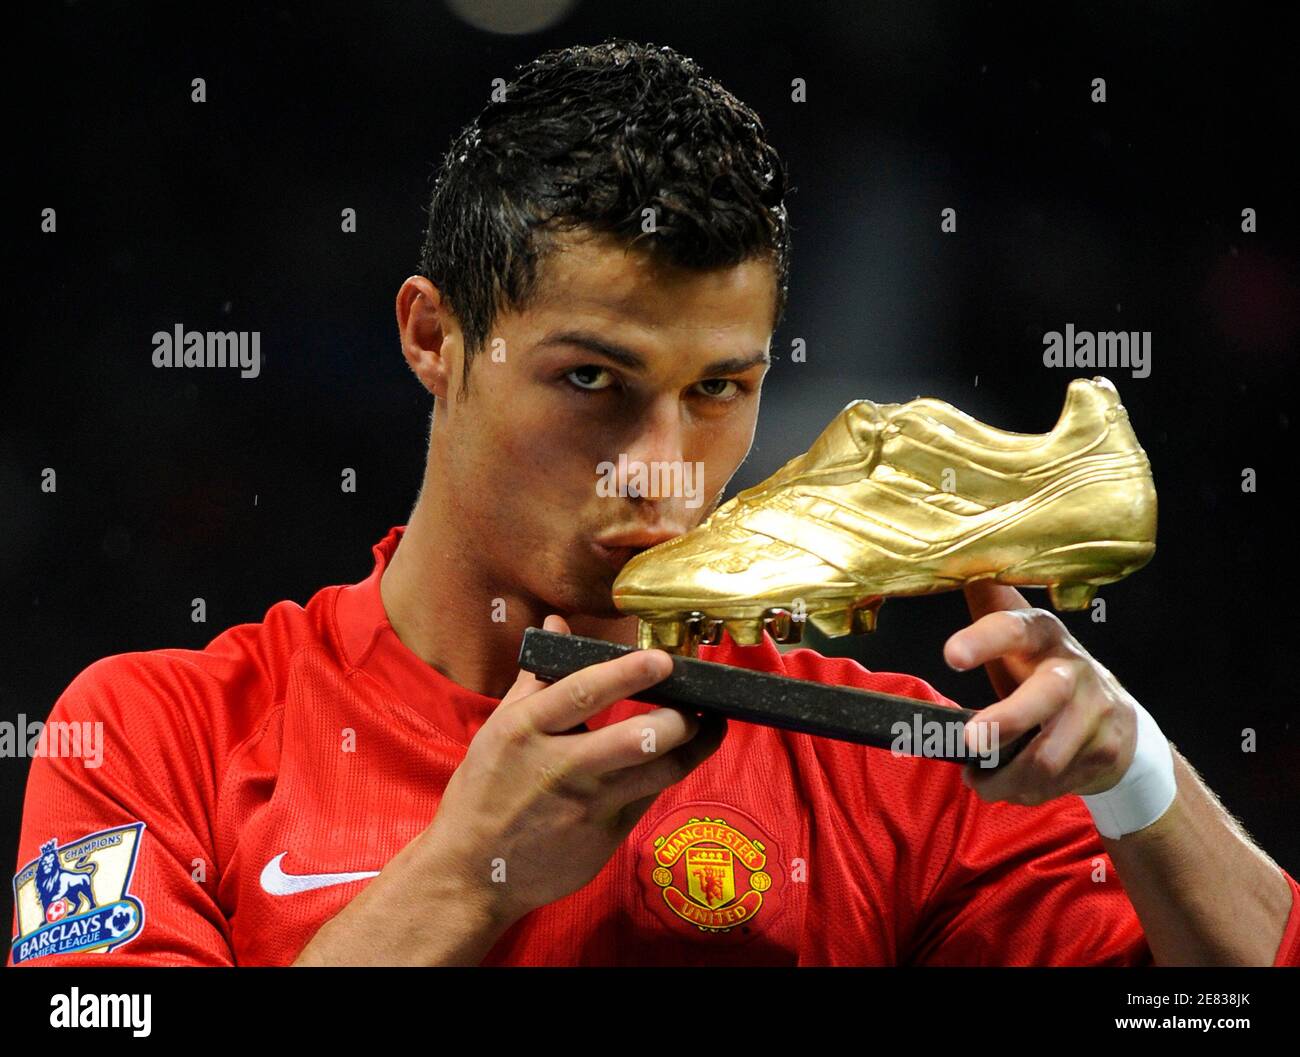 Manchester United's Cristiano Ronaldo kisses the golden boot trophy awarded  to him as 'FIFPro Player of the Year 2008' in a presentation ahead of their  English Premier League soccer match against West